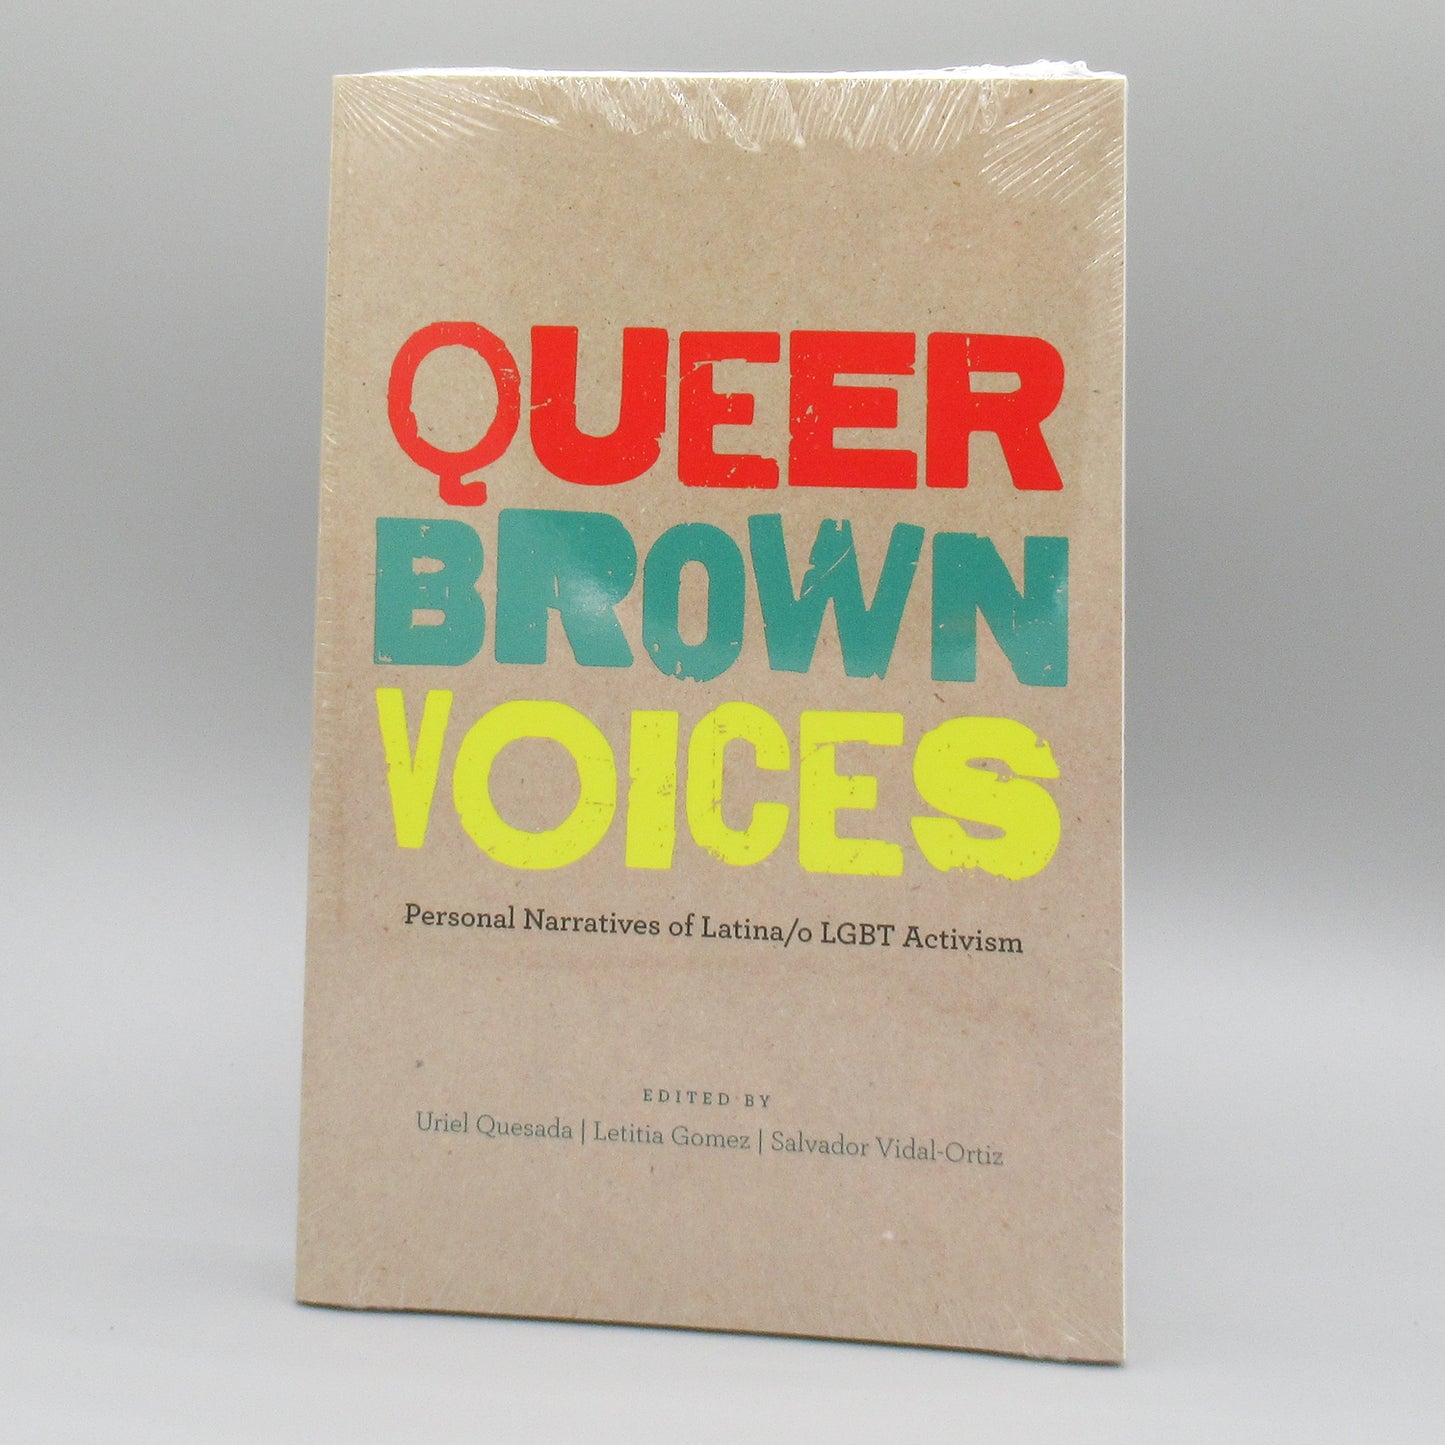 Queer Brown Voices: Personal Narratives of Latina/o LGBT Activism